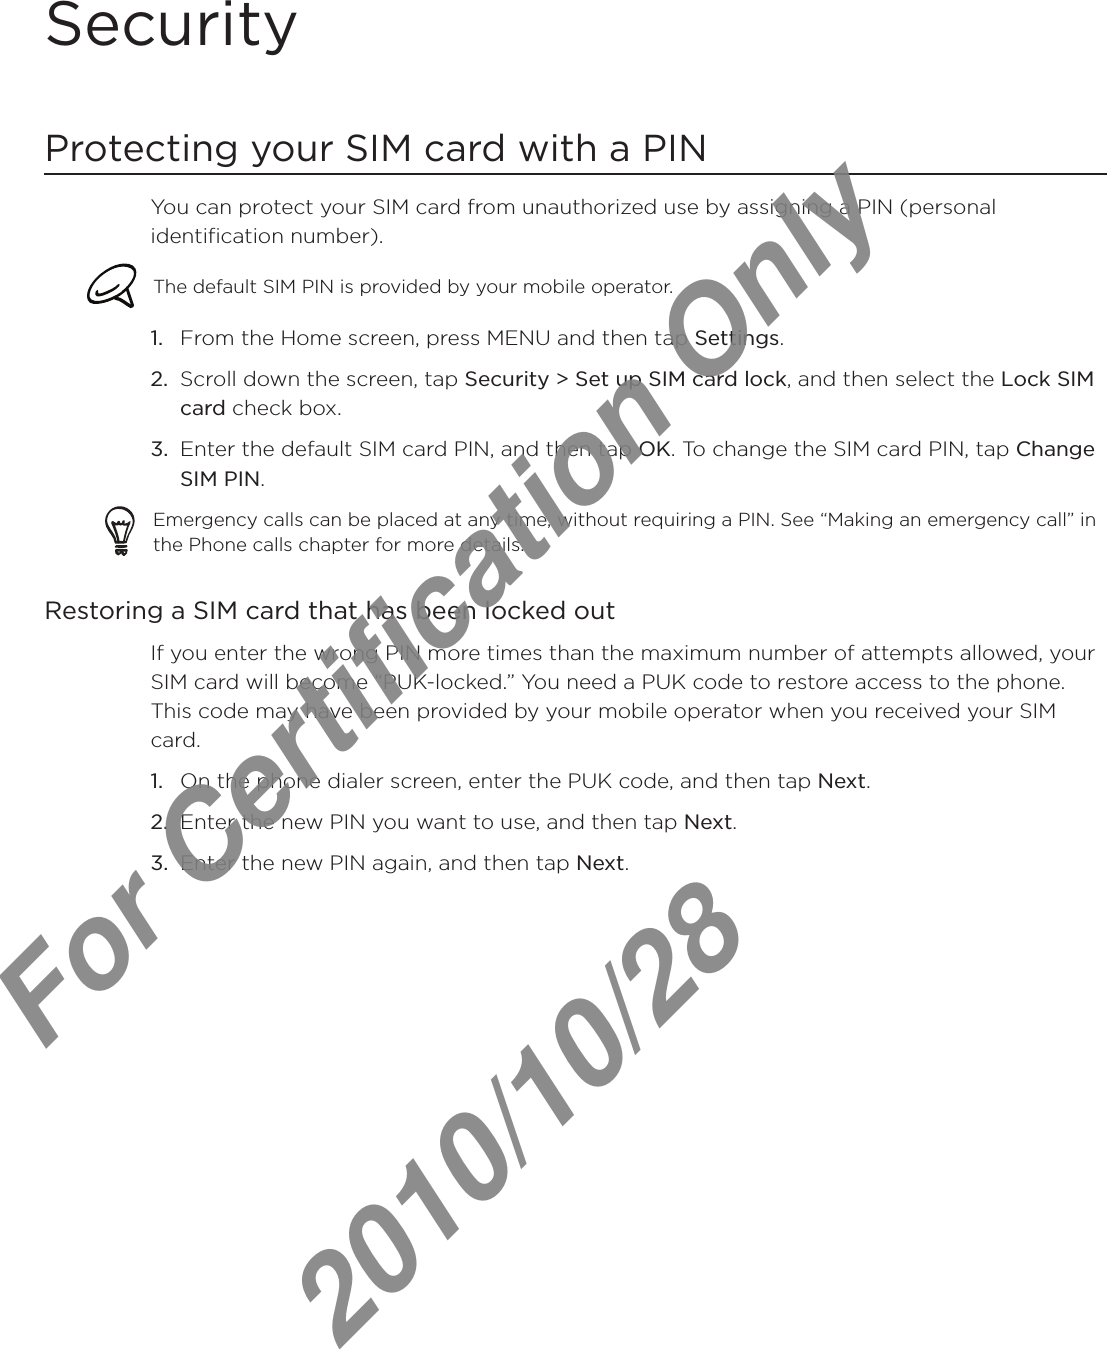 SecurityProtecting your SIM card with a PINYou can protect your SIM card from unauthorized use by assigning a PIN (personal identification number).The default SIM PIN is provided by your mobile operator. From the Home screen, press MENU and then tap Settings.Scroll down the screen, tap Security &gt; Set up SIM card lock, and then select the Lock SIM card check box.Enter the default SIM card PIN, and then tap OK. To change the SIM card PIN, tap Change SIM PIN.Emergency calls can be placed at any time, without requiring a PIN. See “Making an emergency call” in the Phone calls chapter for more details. Restoring a SIM card that has been locked outIf you enter the wrong PIN more times than the maximum number of attempts allowed, your SIM card will become “PUK-locked.” You need a PUK code to restore access to the phone. This code may have been provided by your mobile operator when you received your SIM card.On the phone dialer screen, enter the PUK code, and then tap Next.Enter the new PIN you want to use, and then tap Next. Enter the new PIN again, and then tap Next.1.2.3.1.2.3.For Certification Only   2010/10/28